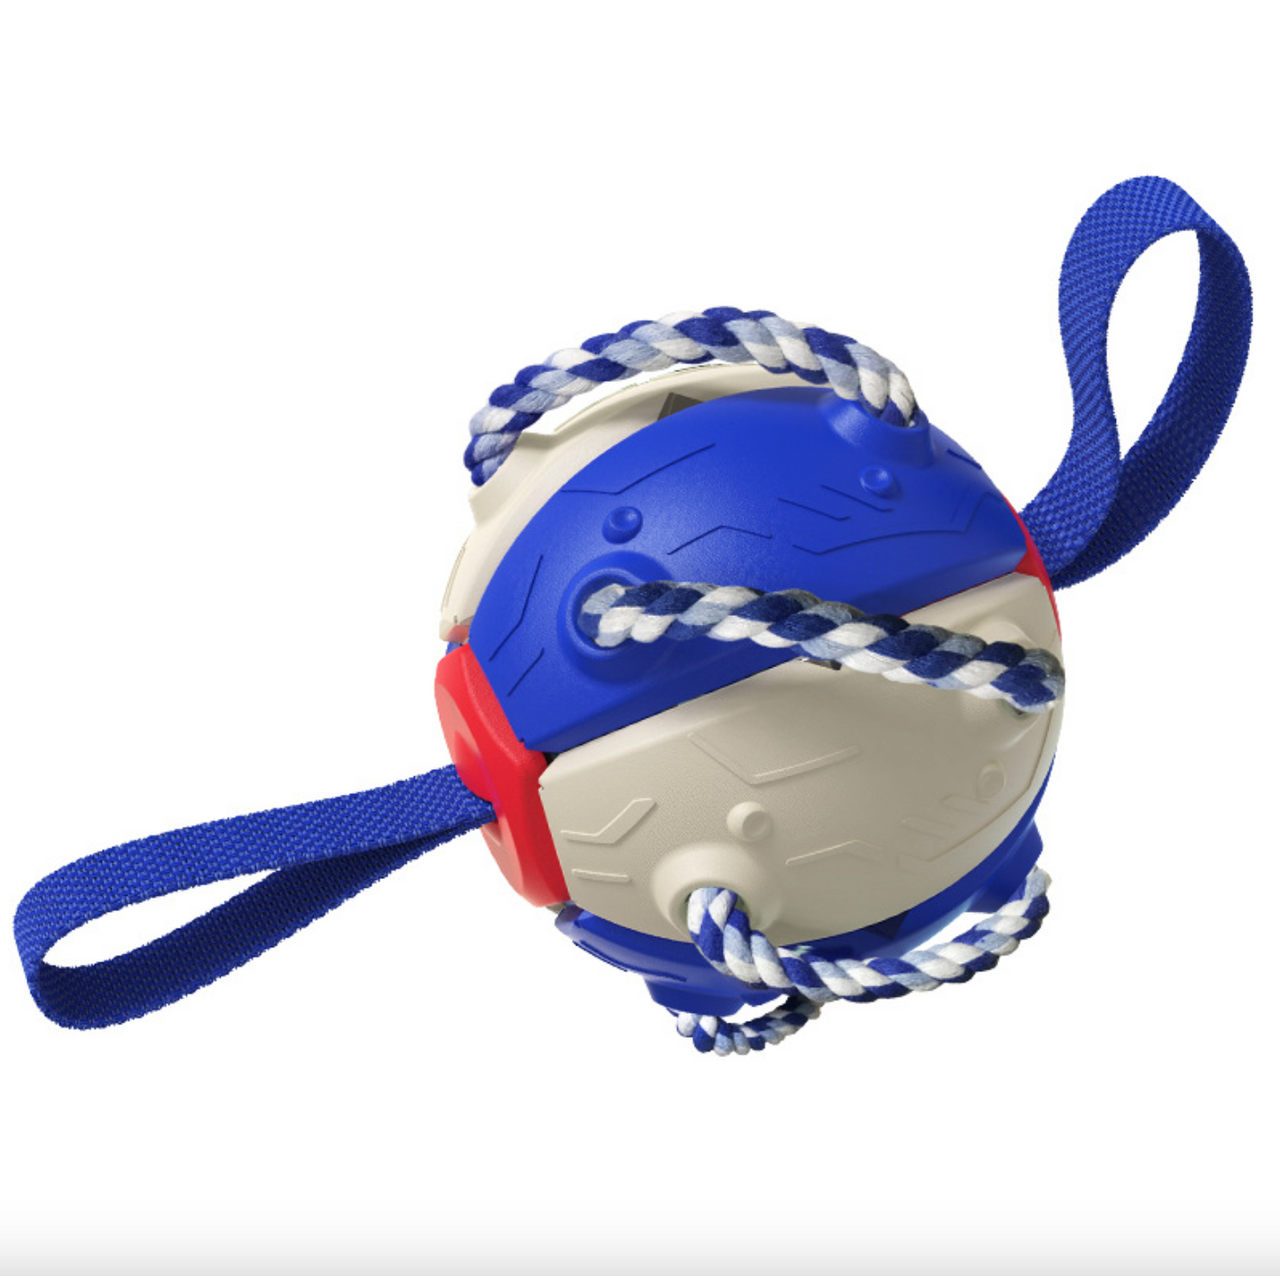 Outdoor Interactive Frisbee: A bite-resistant dog toy for soccer and play JonxiFon